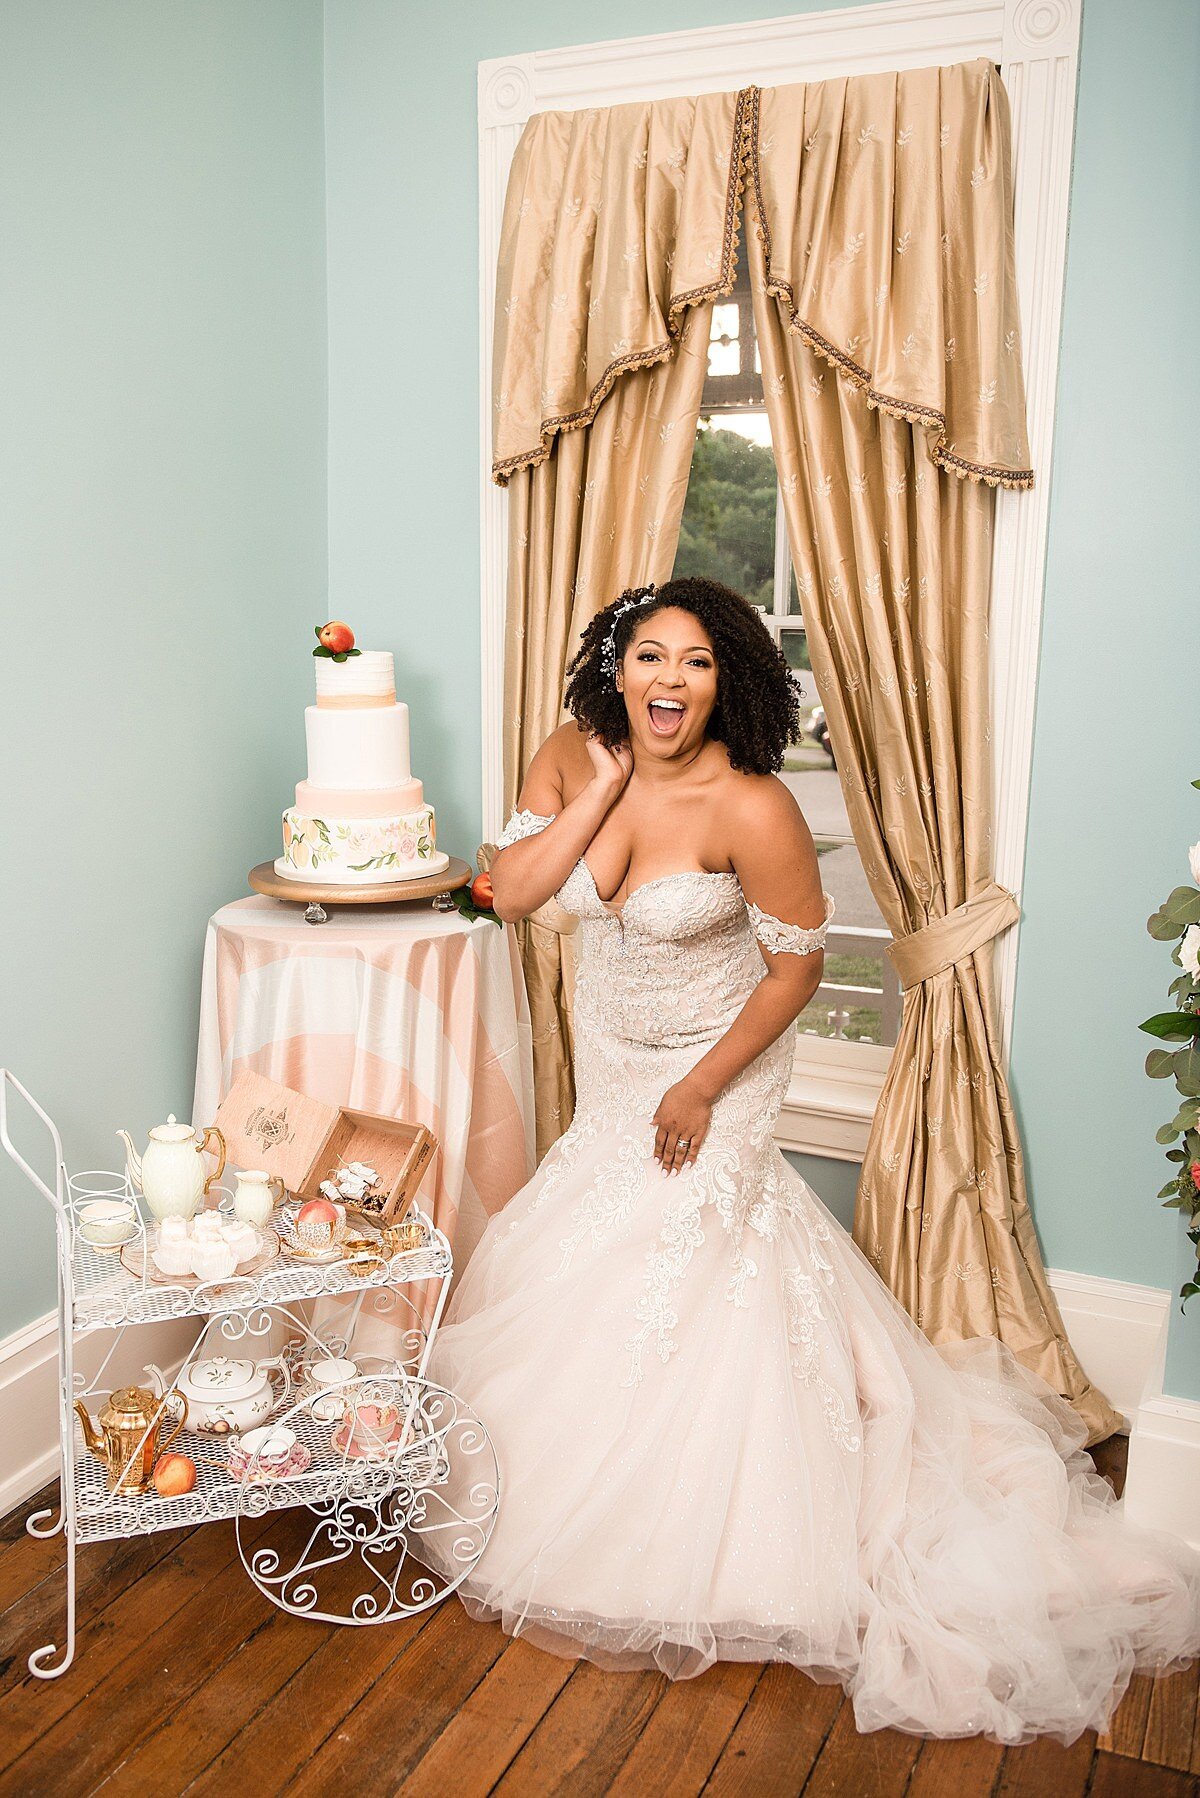 African American bride, wearing an off the shoulder lace mermaid wedding dress with a long train is very excited to see her five tier hand painted peach themed wedding cake and white metal tea and dessert cart at Ravenswood Mansion's blue room.